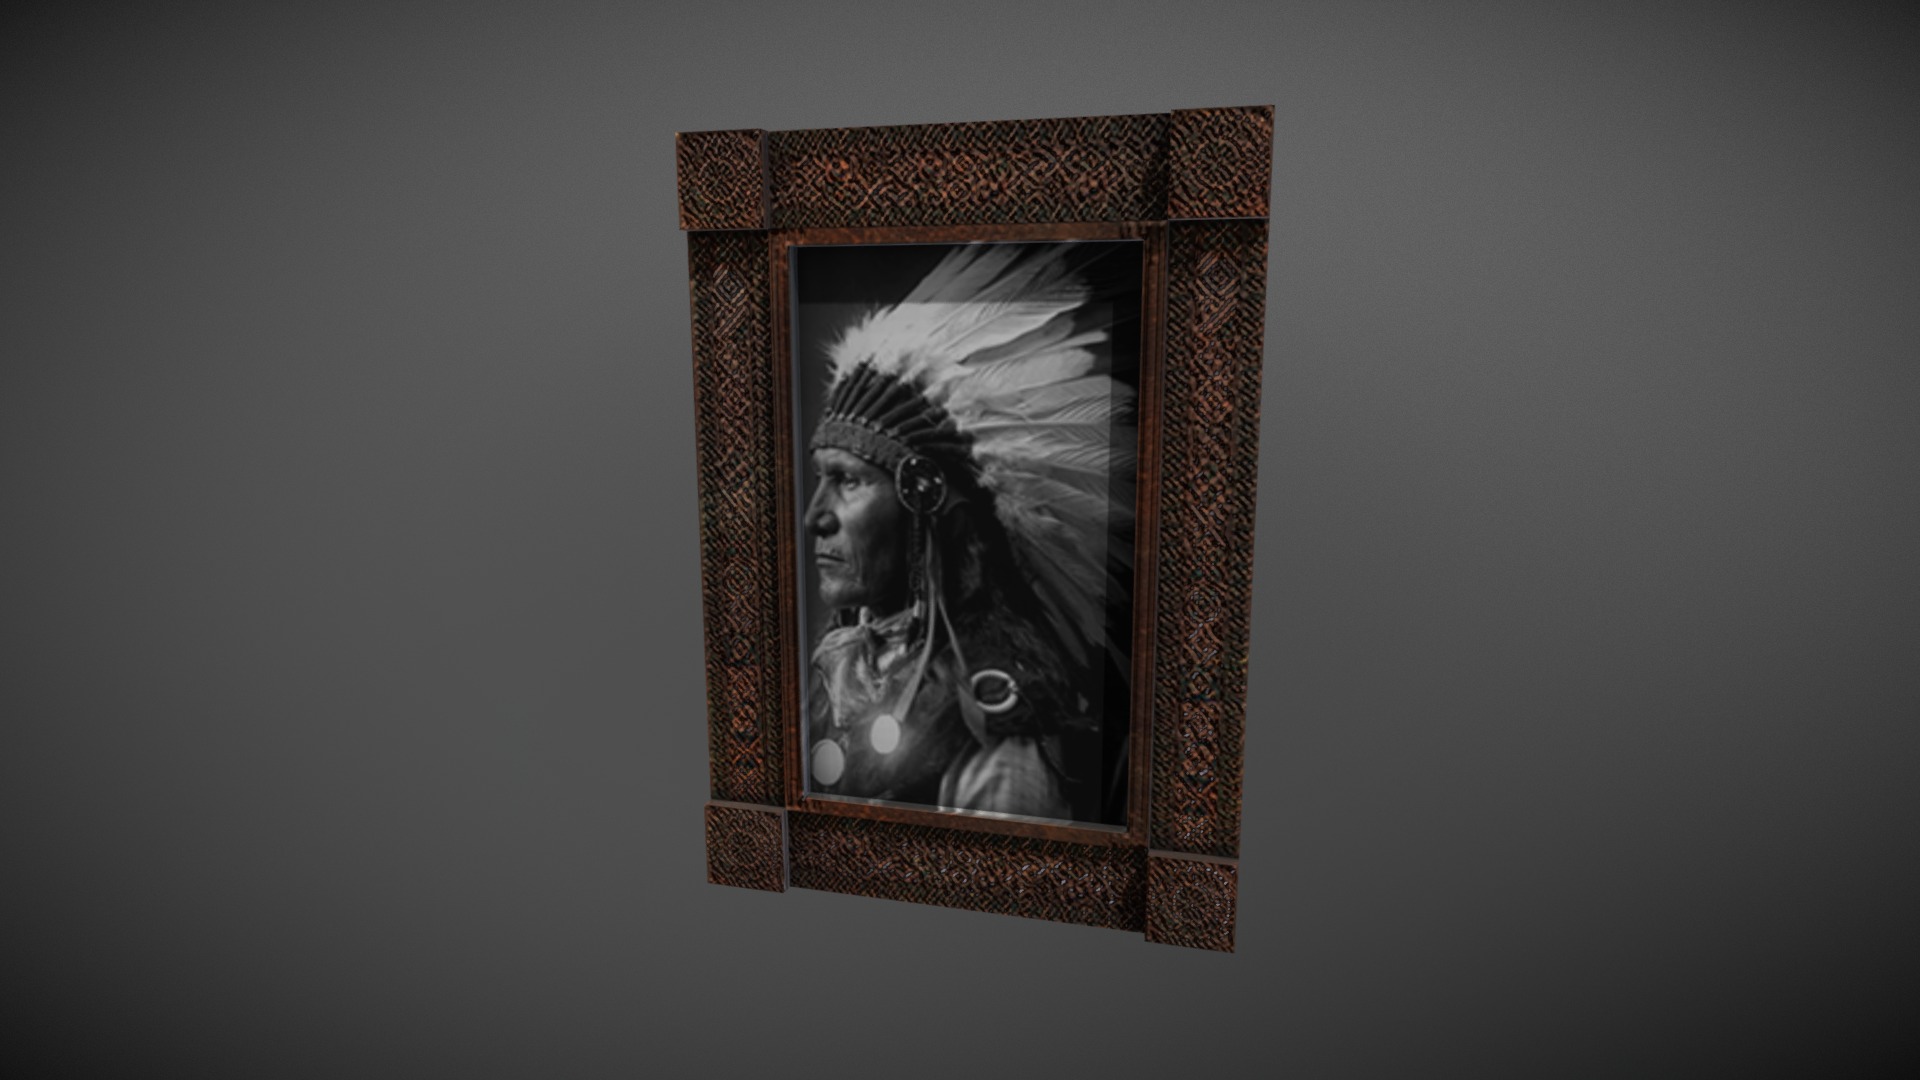 3D model Wall Picture Low Poly - This is a 3D model of the Wall Picture Low Poly. The 3D model is about a framed painting of a person.